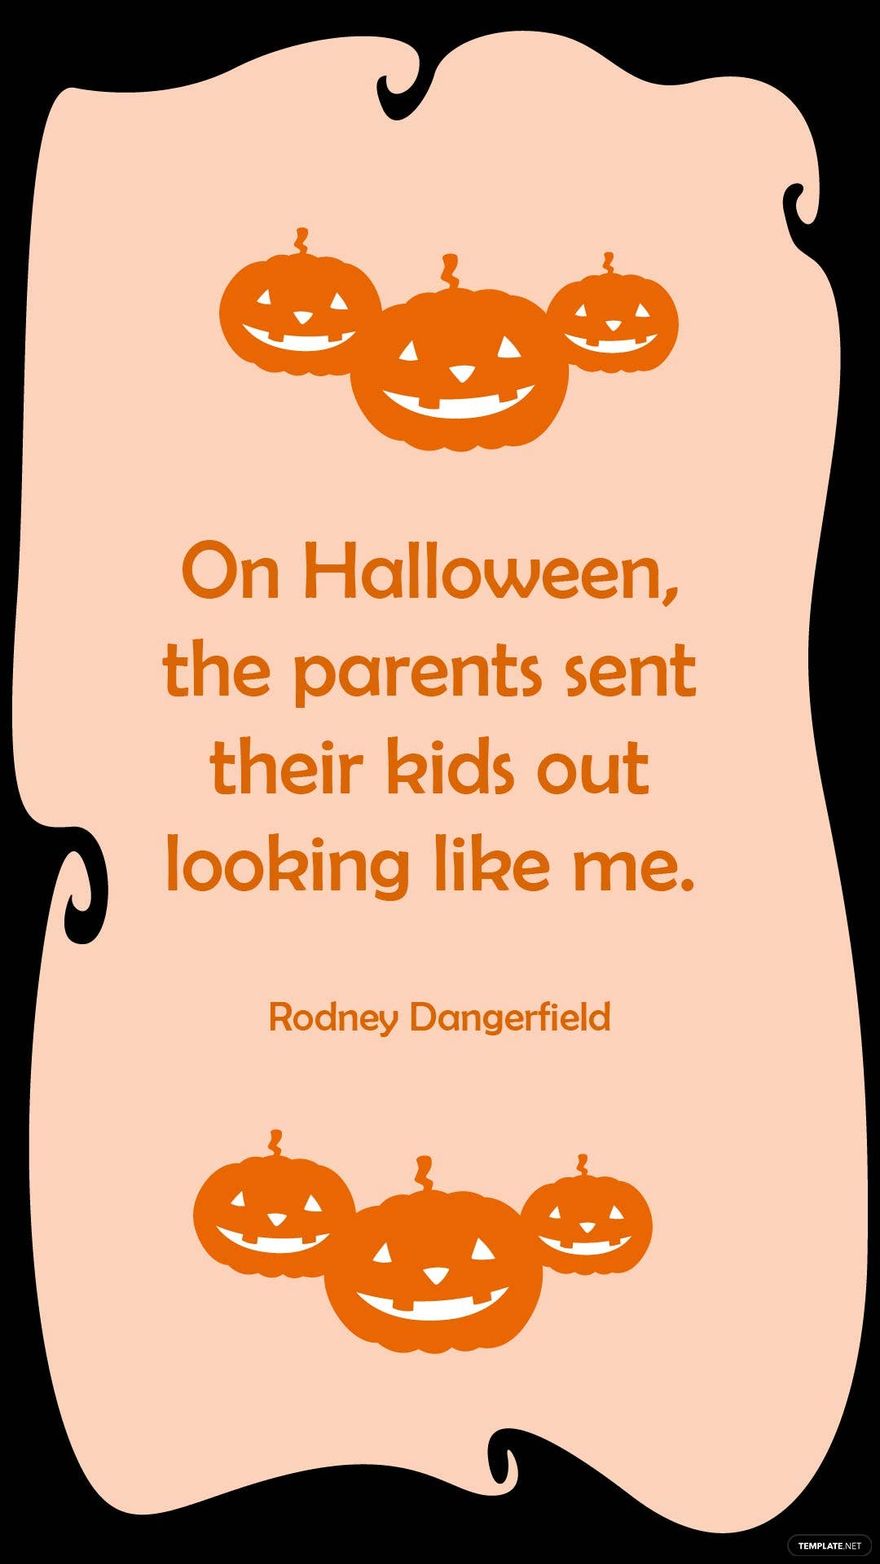 Free Rodney Dangerfield-On Halloween, the parents sent their kids out looking like me.